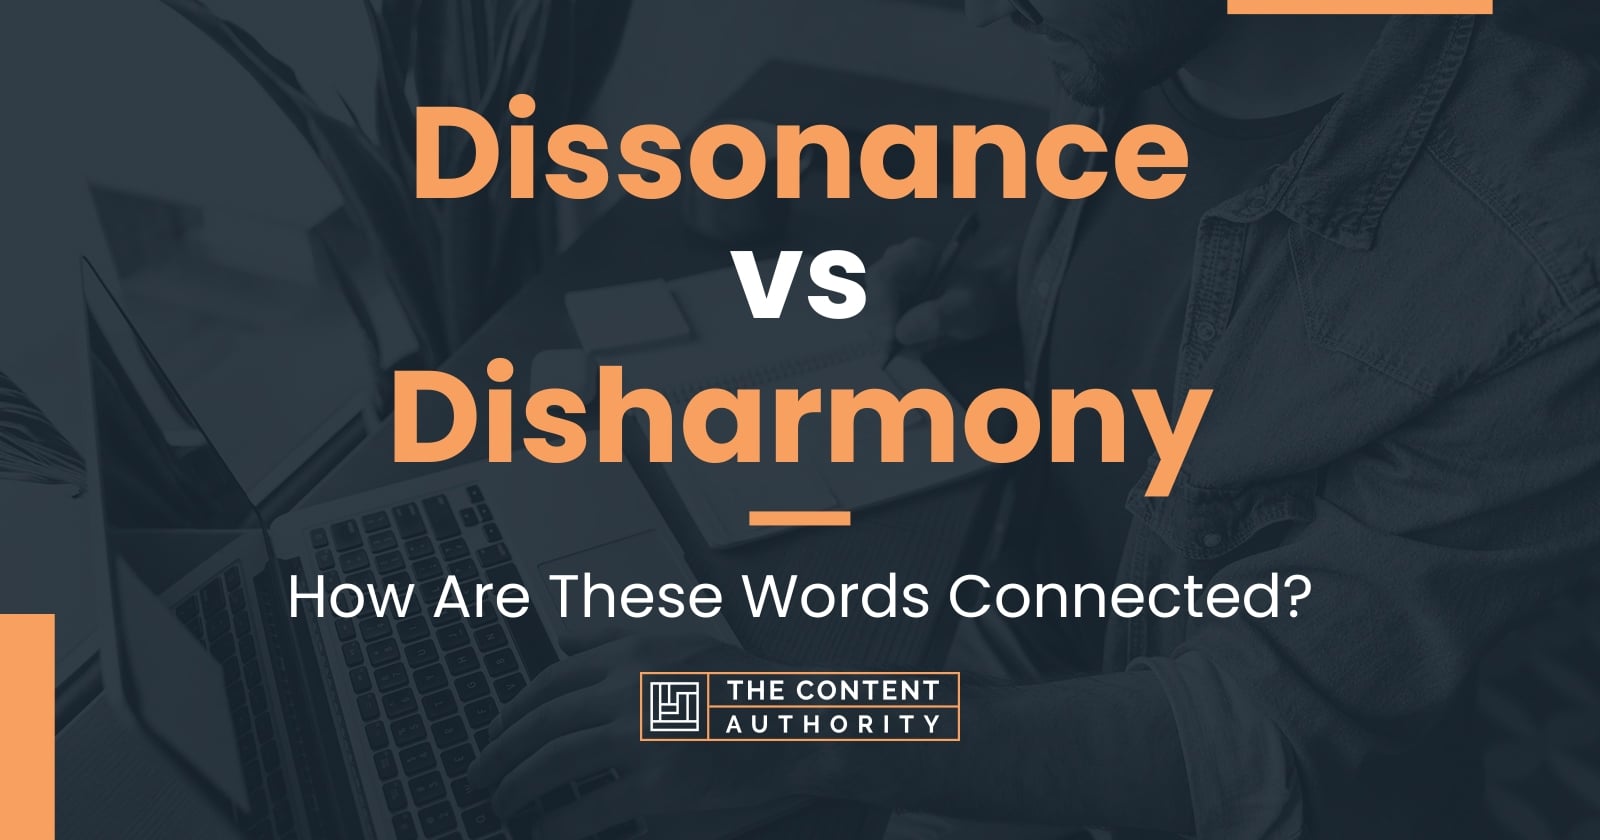 Dissonance vs Disharmony: How Are These Words Connected?